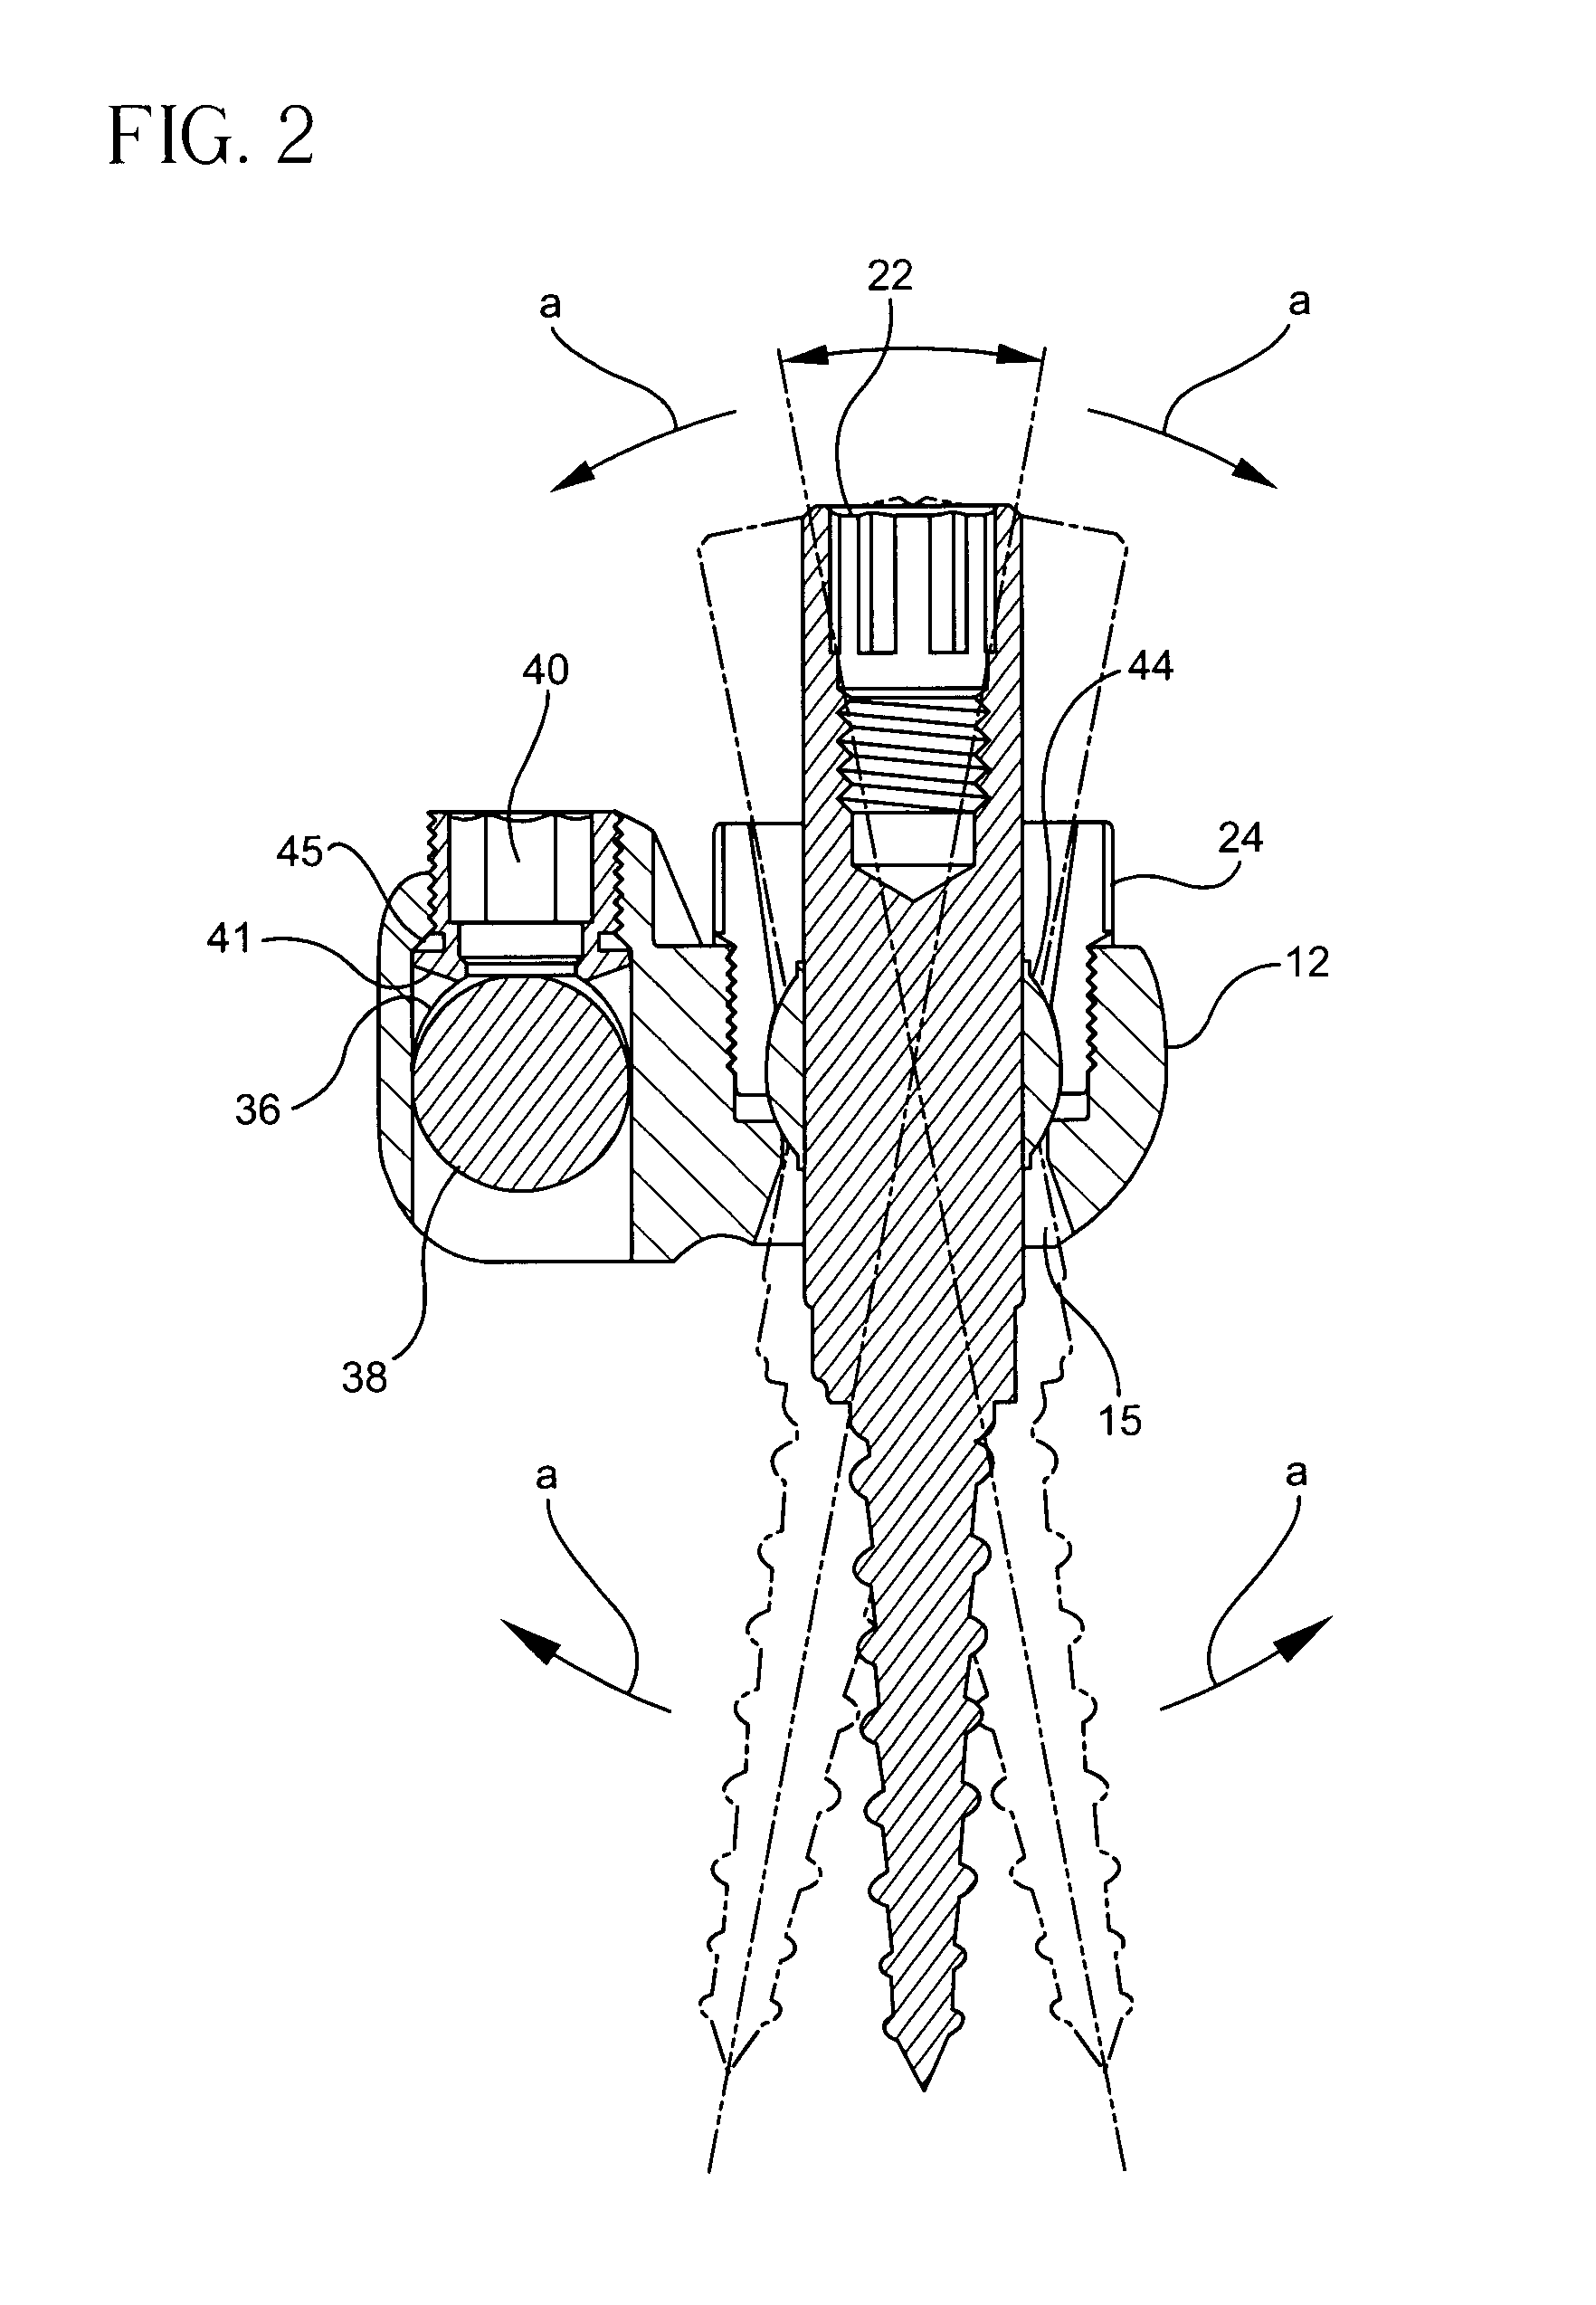 Bone fixation assembly and method